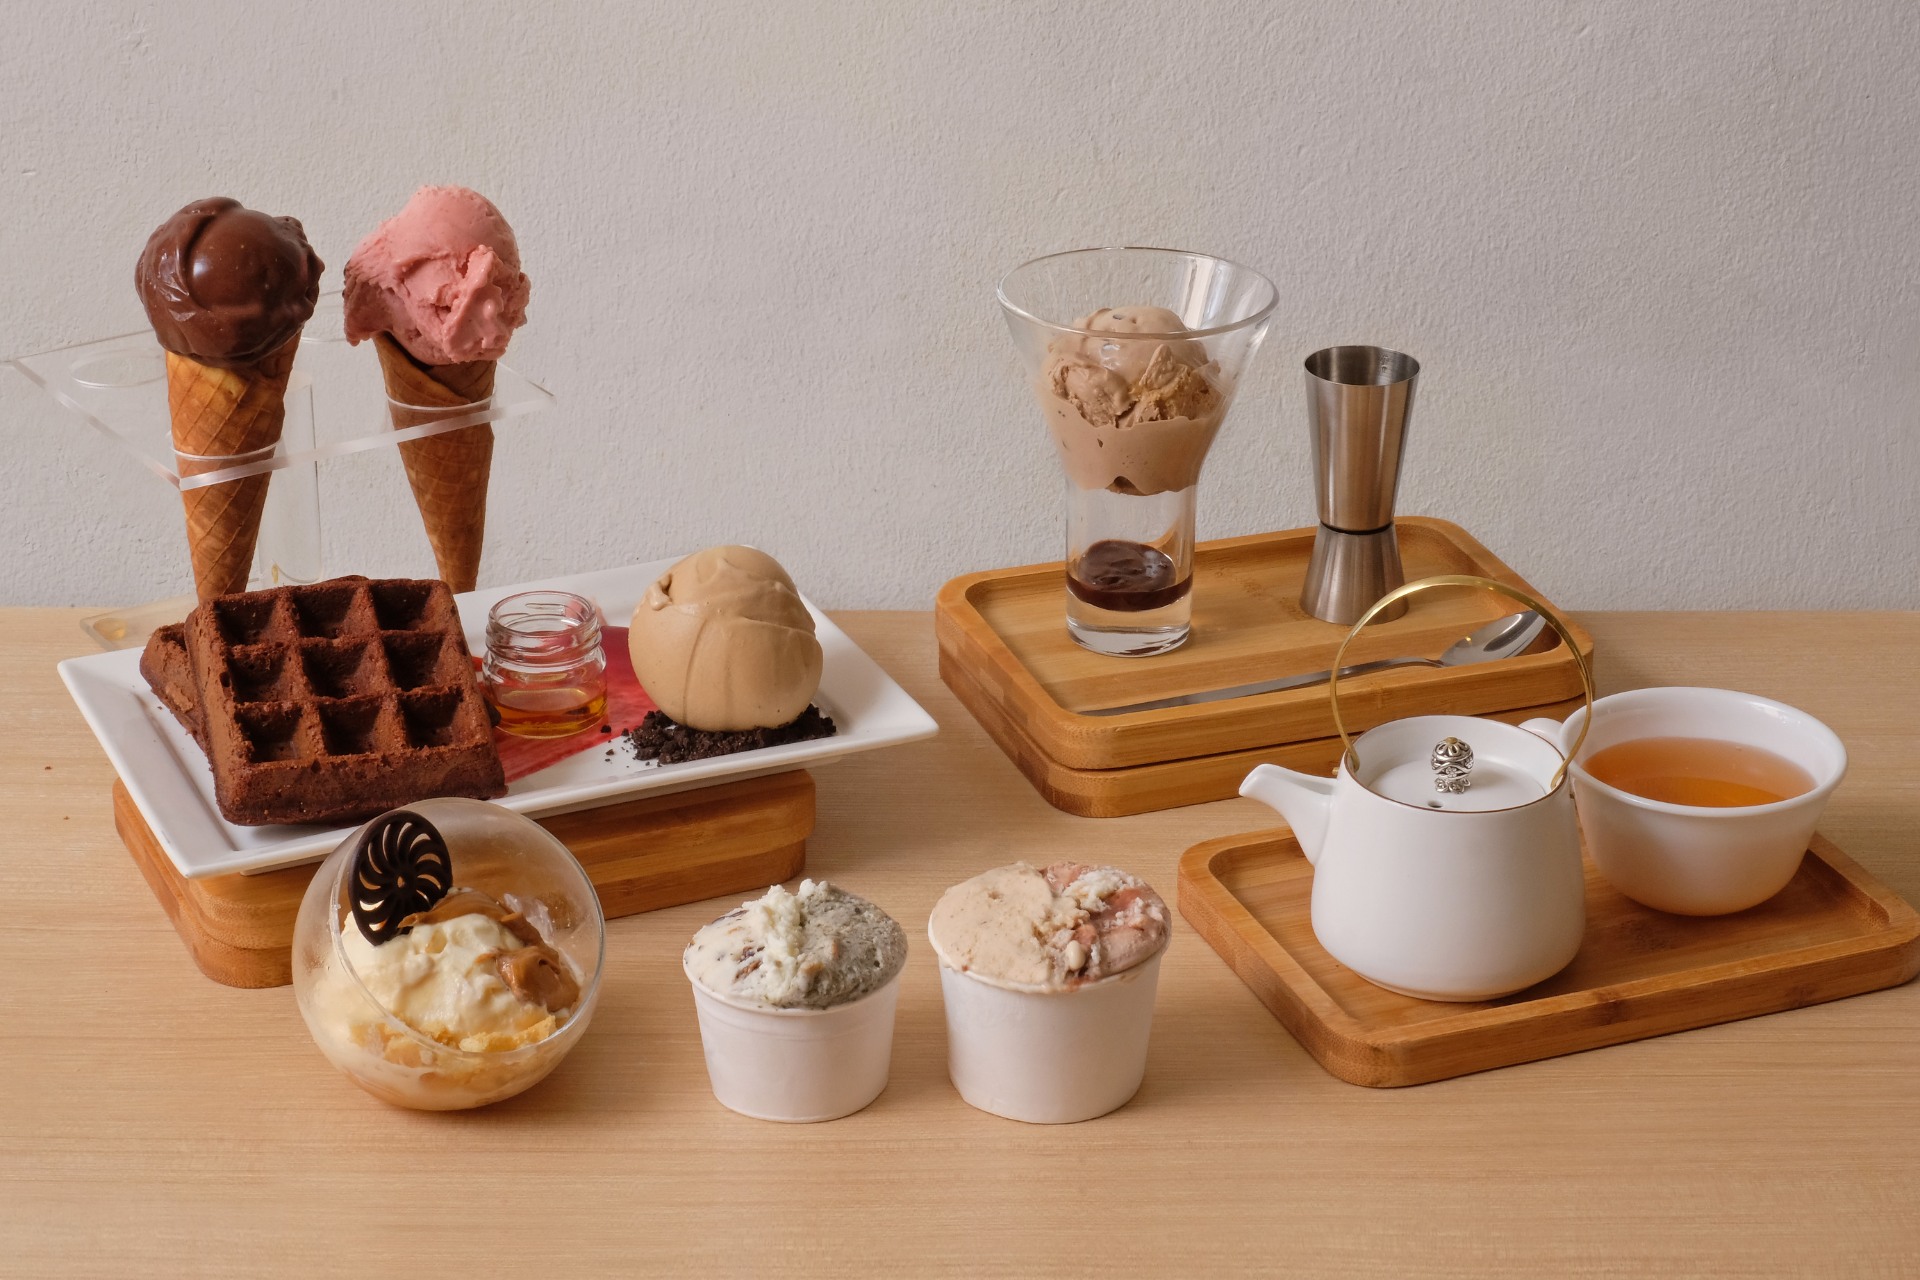 A lineup of new items at Tom’s Palette includes Affogatos, Teaffogatos, Parfaits and specialty Asian teas. Photo: Tom’s Palette
